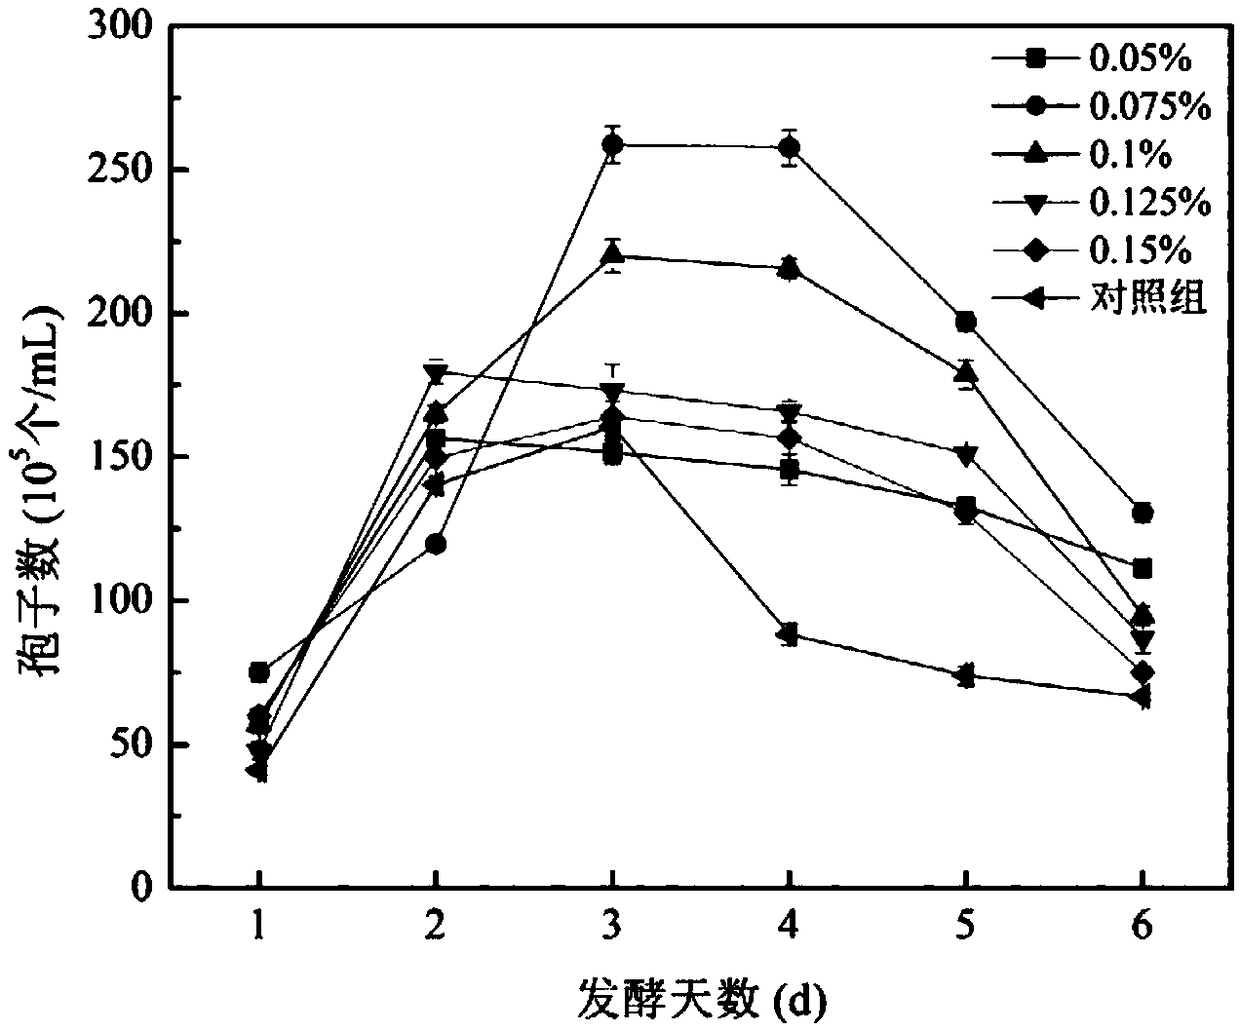 Eurotium cristatum liquid state fermentation method of ginkgo seeds, and product prepared by eurotium cristatum liquid state fermentation method and application of product